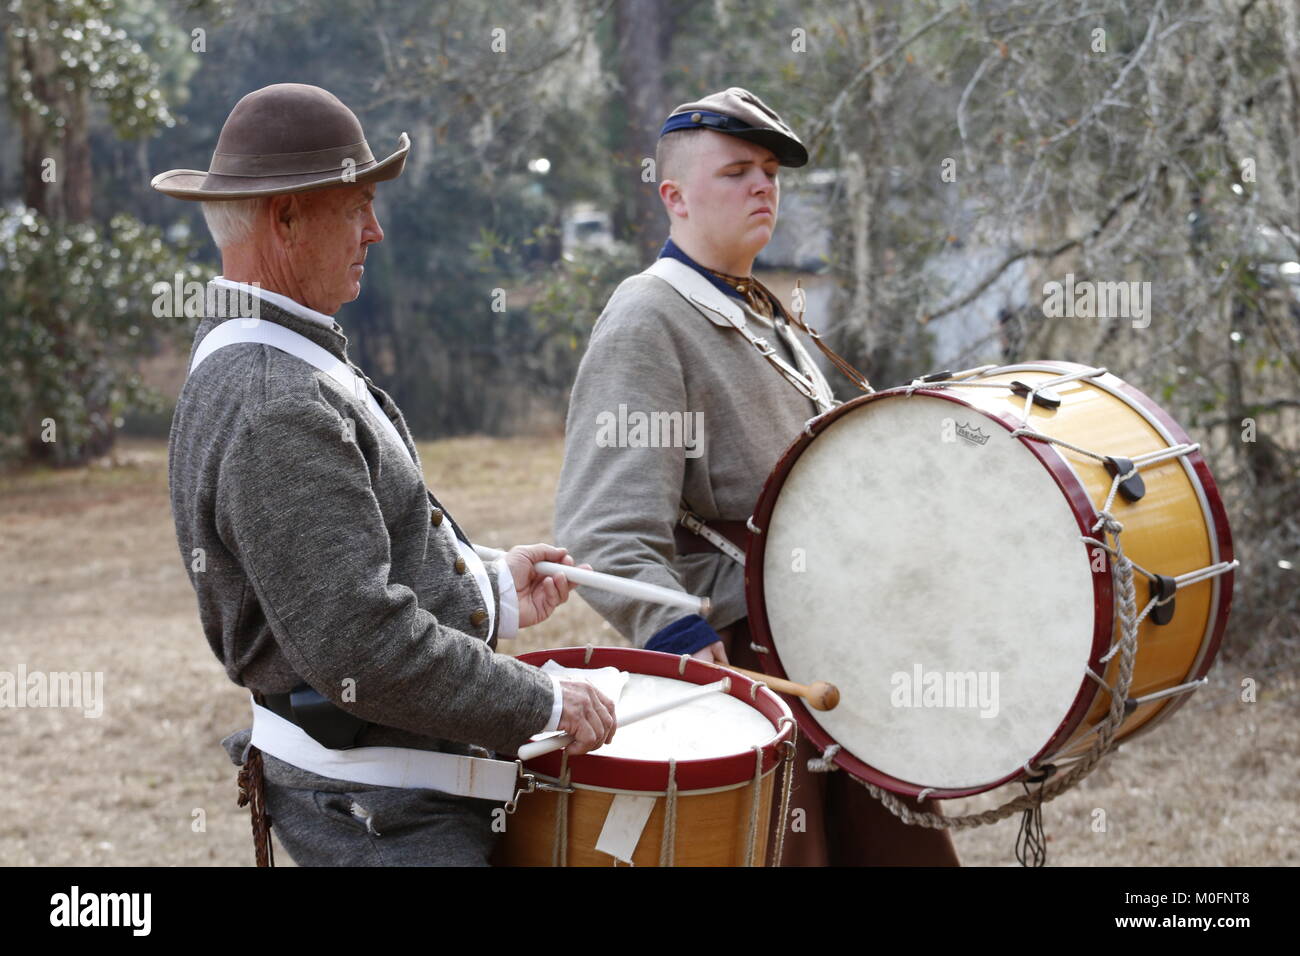 Confederate marching drummers at a Civil War Re-enactment of a battle that happened in Hernando County, Florida in July of l864. Stock Photo